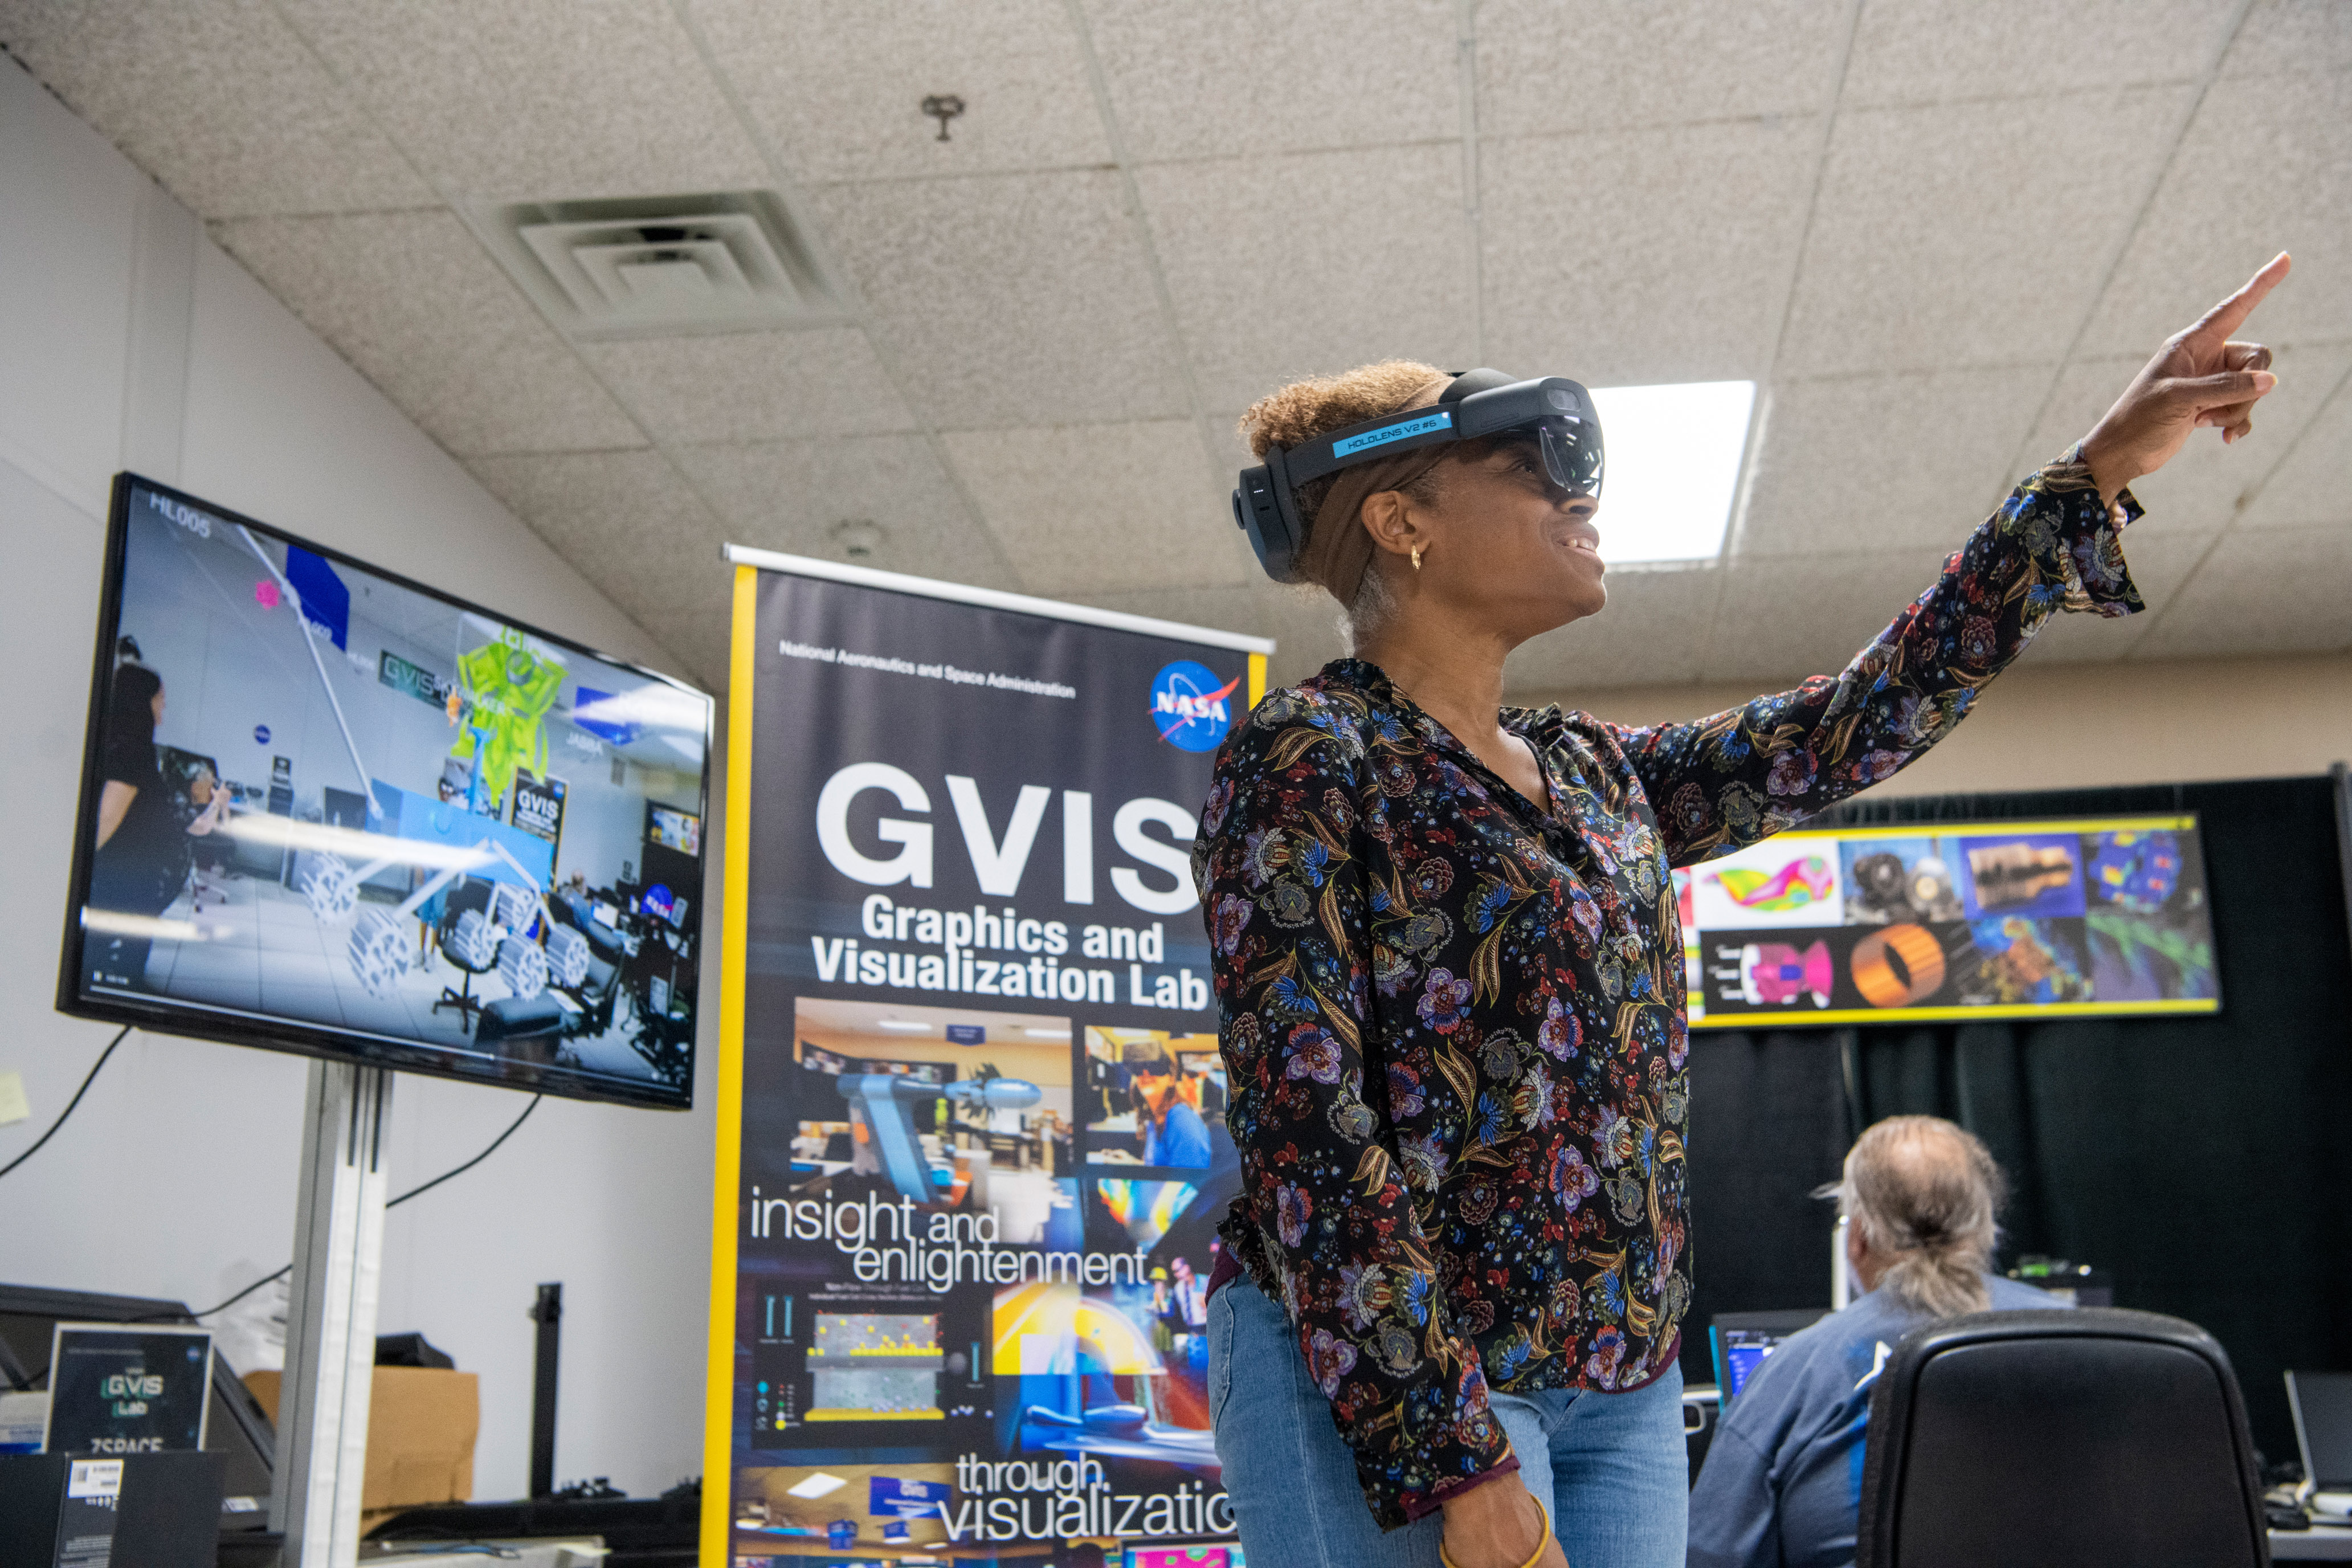 slide 2 - NASA engineer looks through the Microsoft HoloLens to see the spacecrafts the students designed.